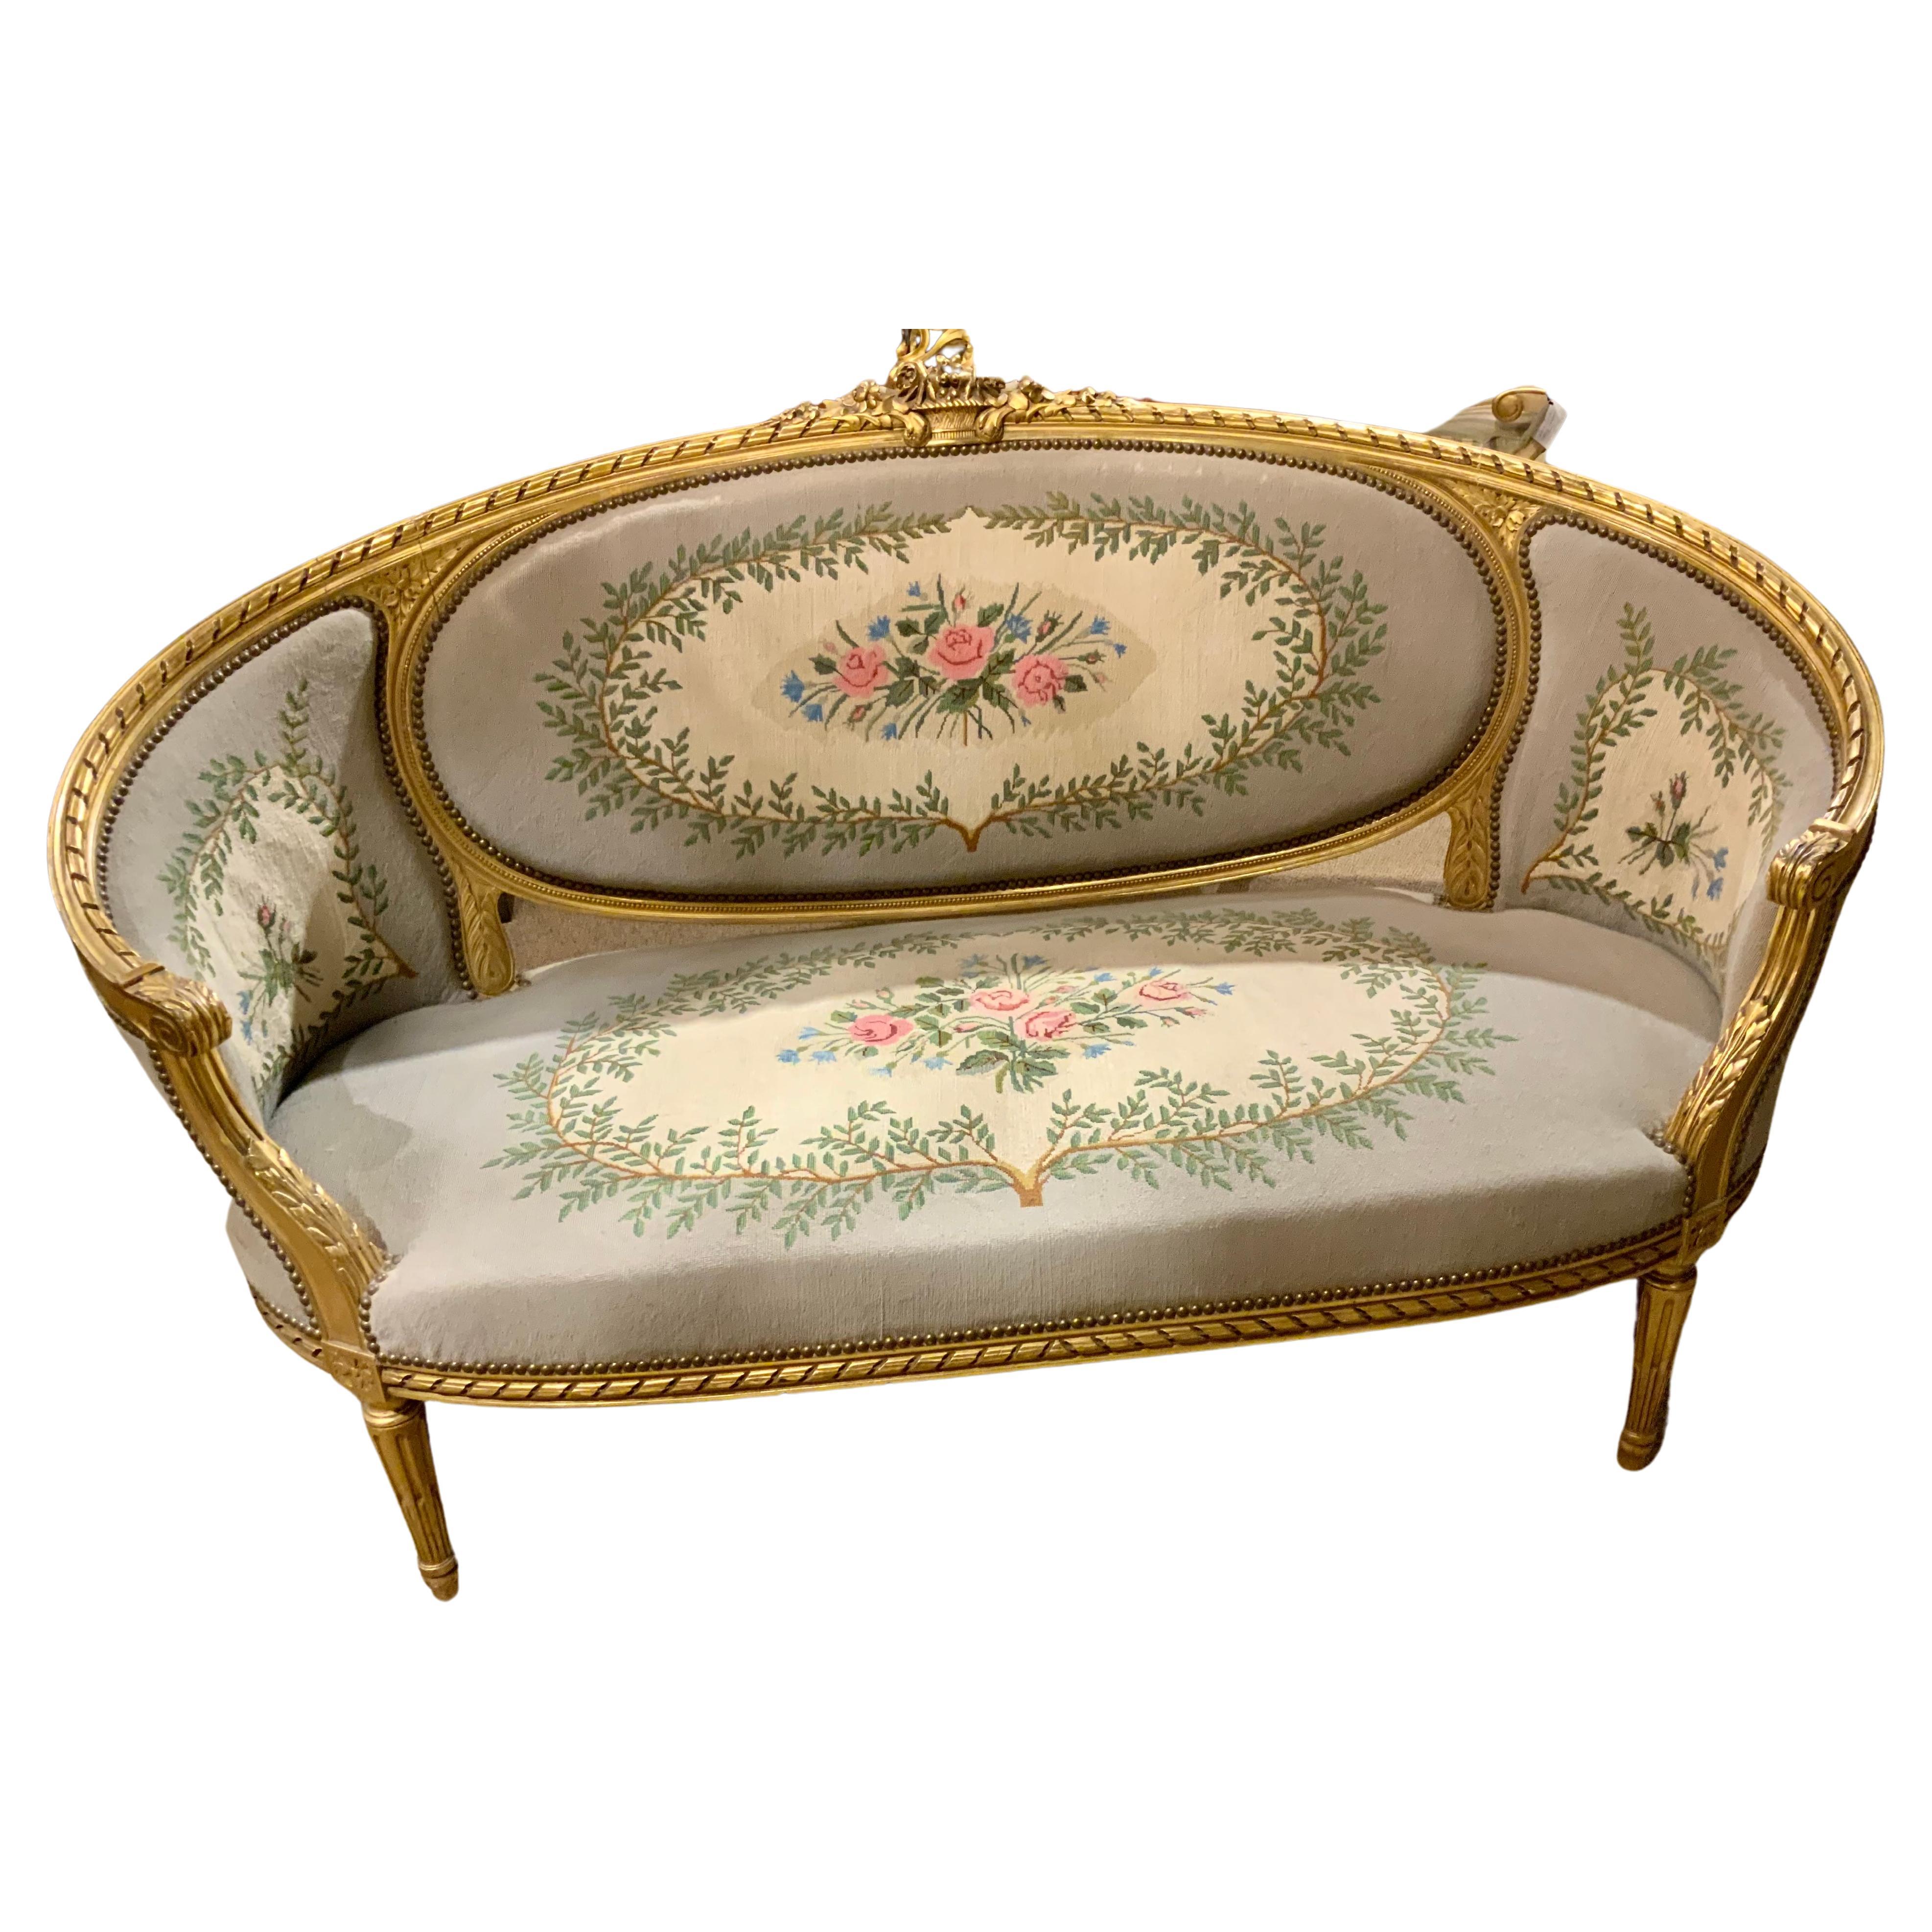 French Louis XVI-Style Gilt Wood Settee/Canapé  with Needlepoint